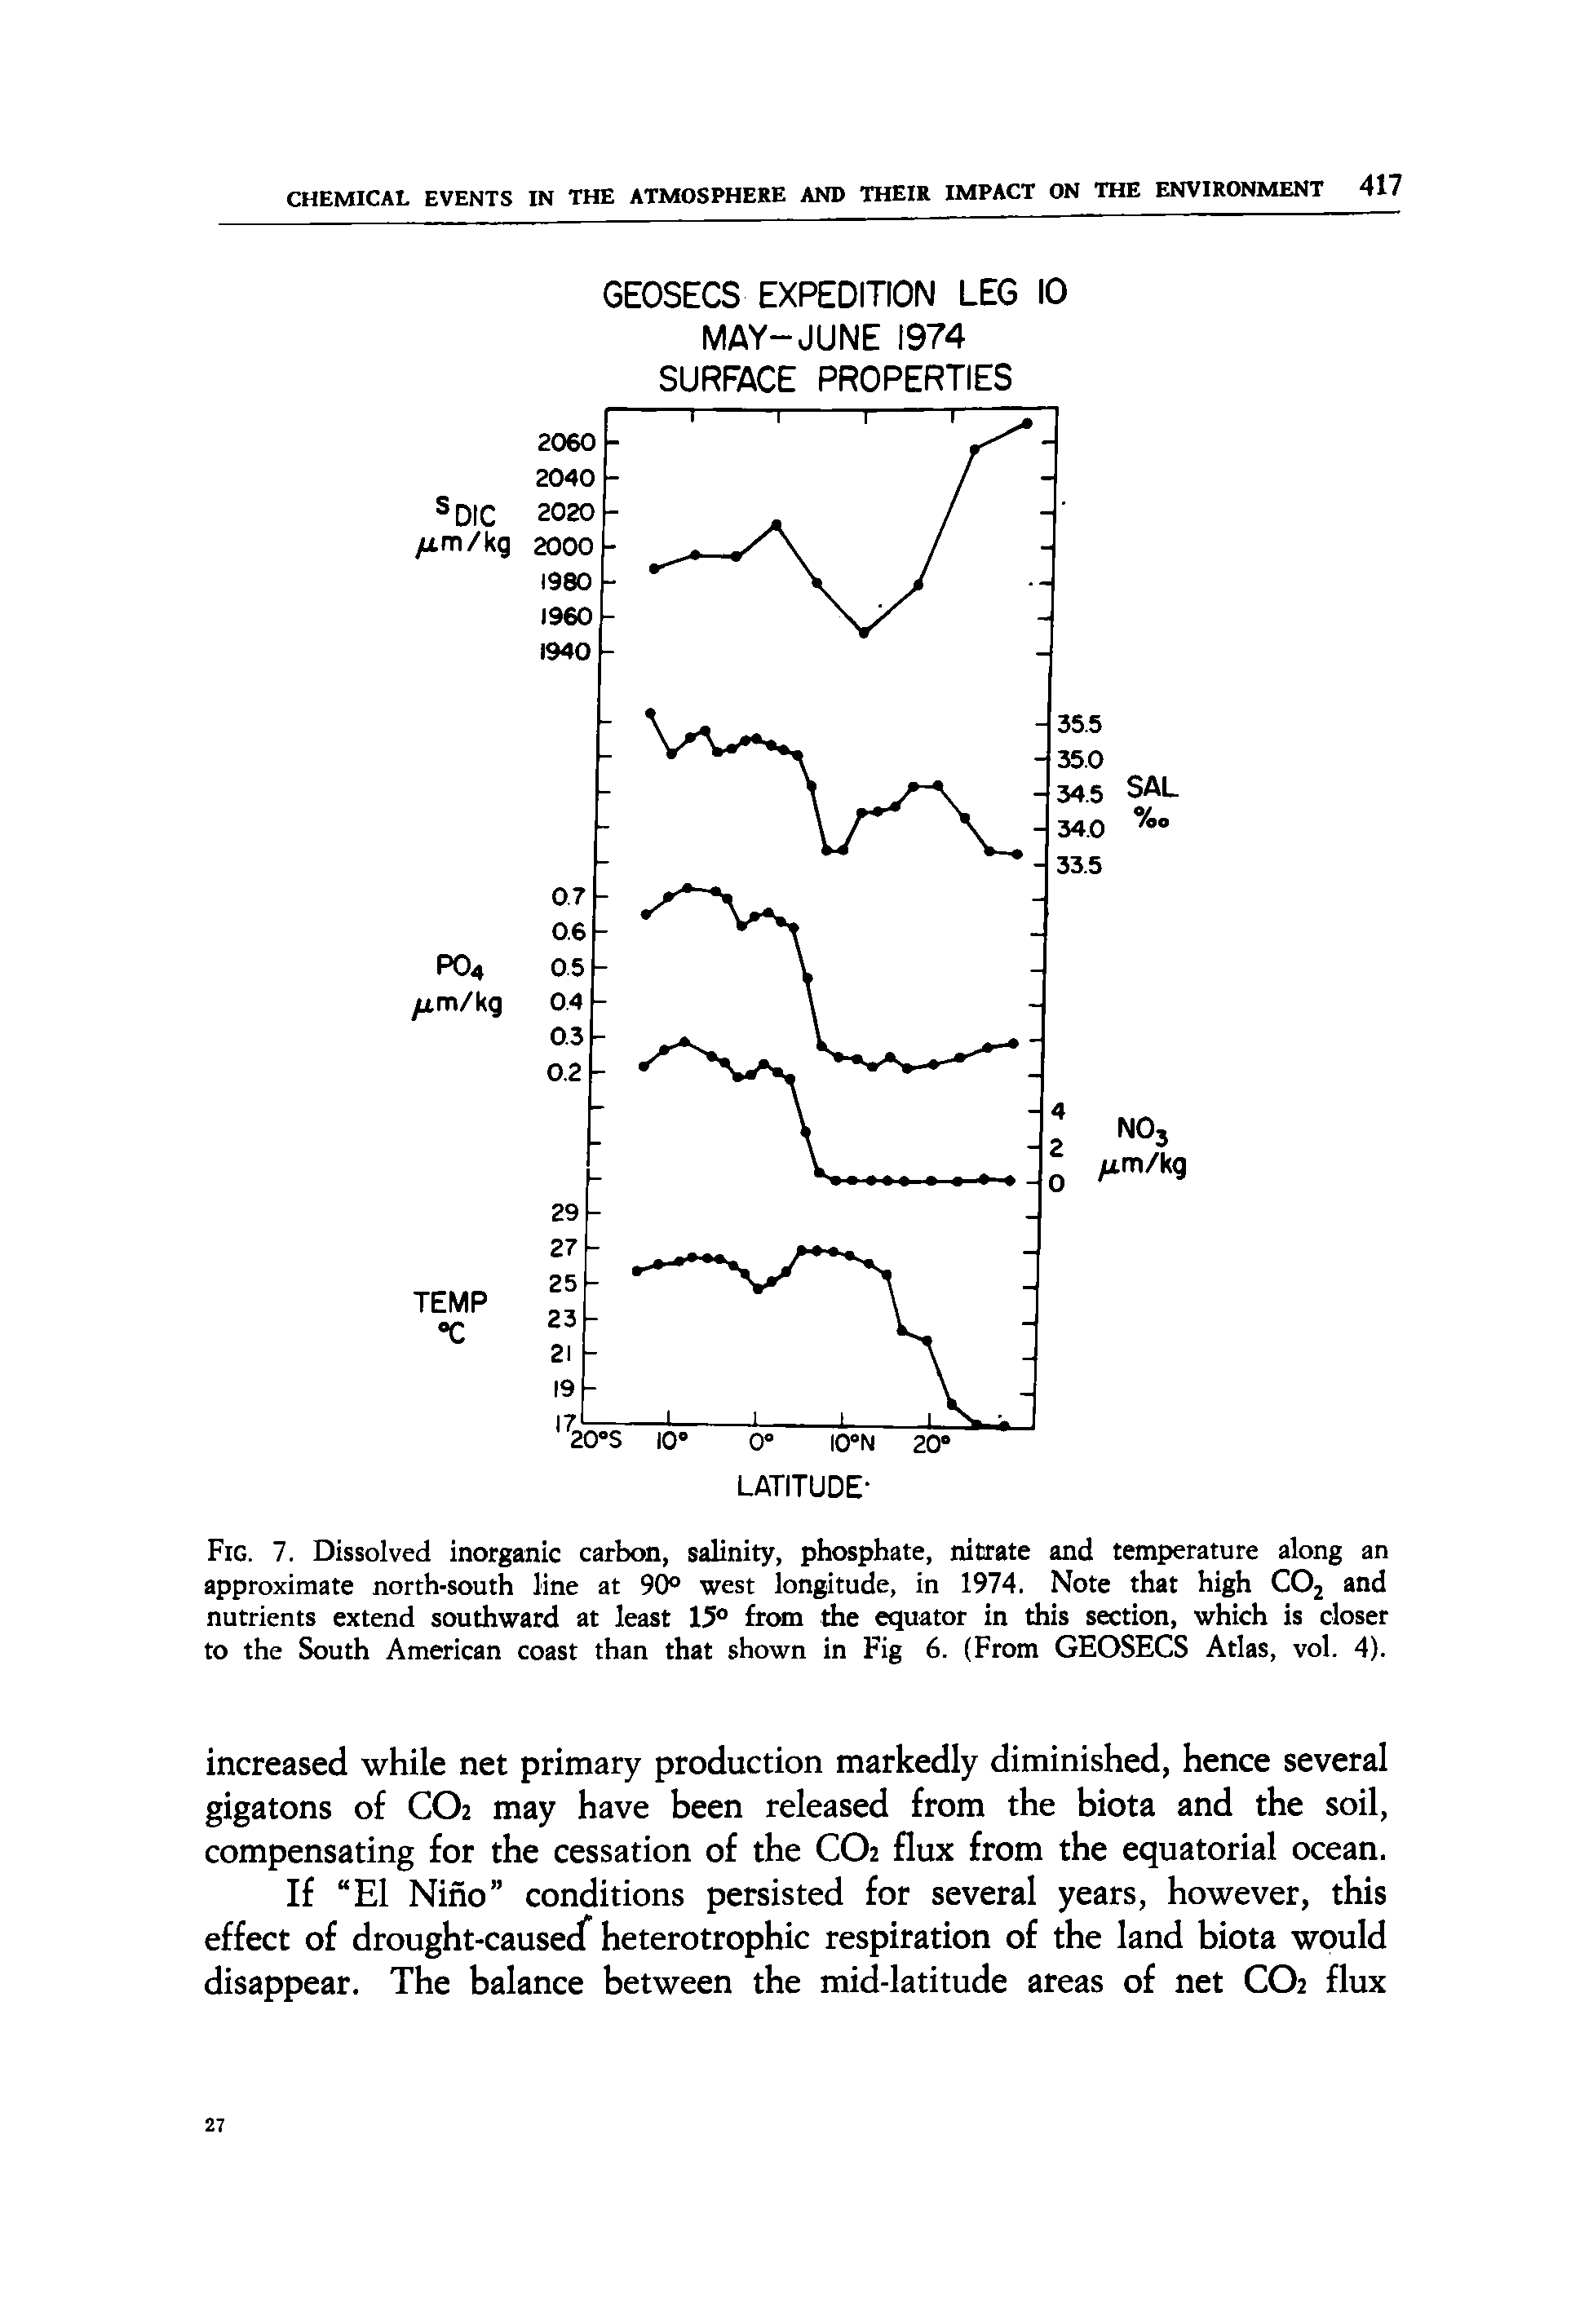 Fig. 7. Dissolved inorganic carbon, salinity, phosphate, nitrate and temperature along an approximate north-south line at 90° west longitude, in 1974. Note that high CO2 and nutrients extend southward at least 15° from the equator in this section, which is closer to the South American coast than that shown in Fig 6. (From GEOSECS Atlas, vol. 4).